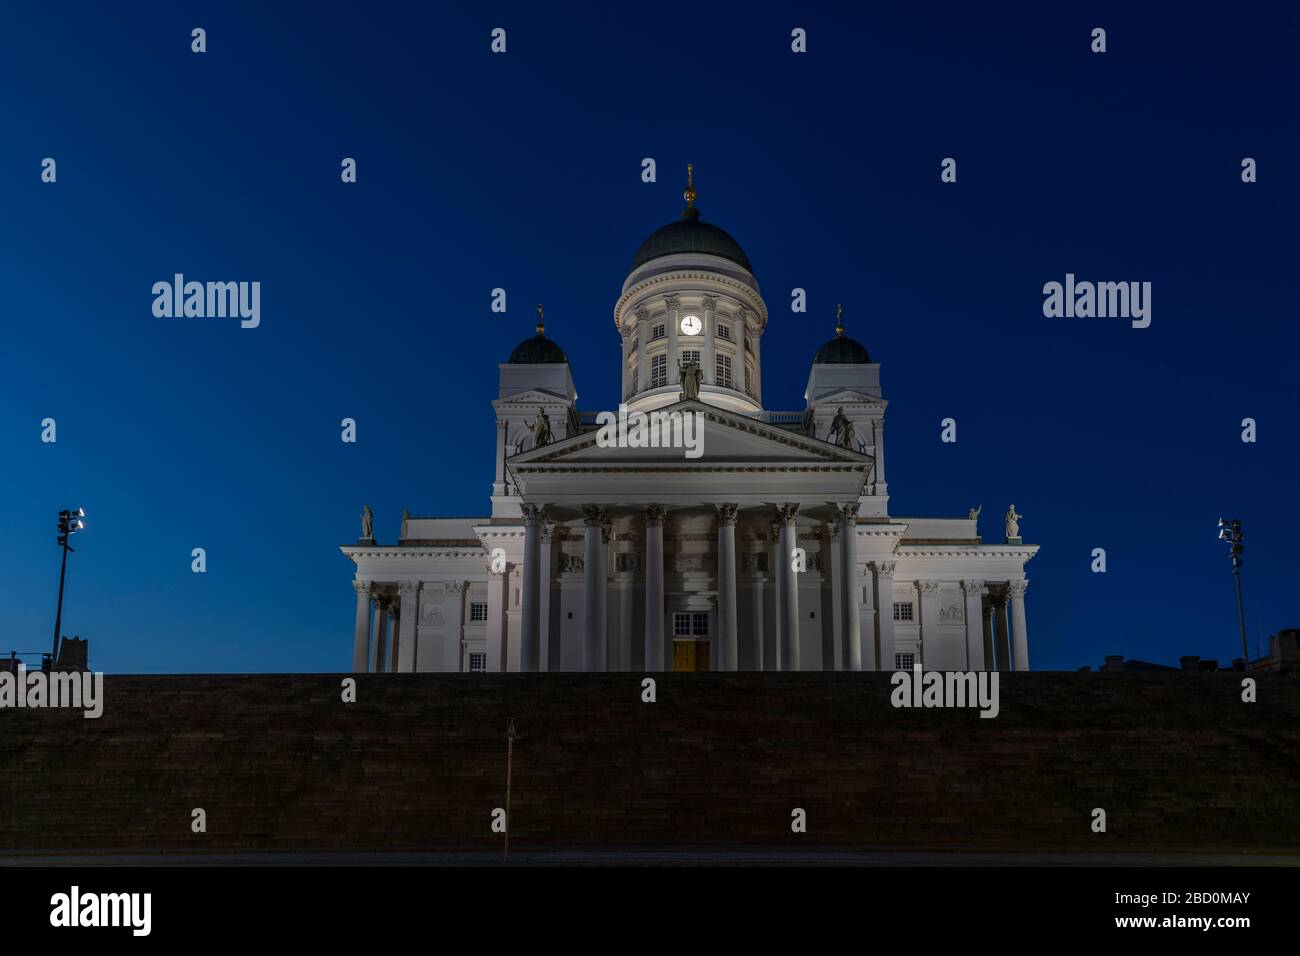 Helsinki Cathedral is a major landmark of Finnish capital. Normally it's crowded by tourists but due to coronavirus pandemic now empty. Stock Photo